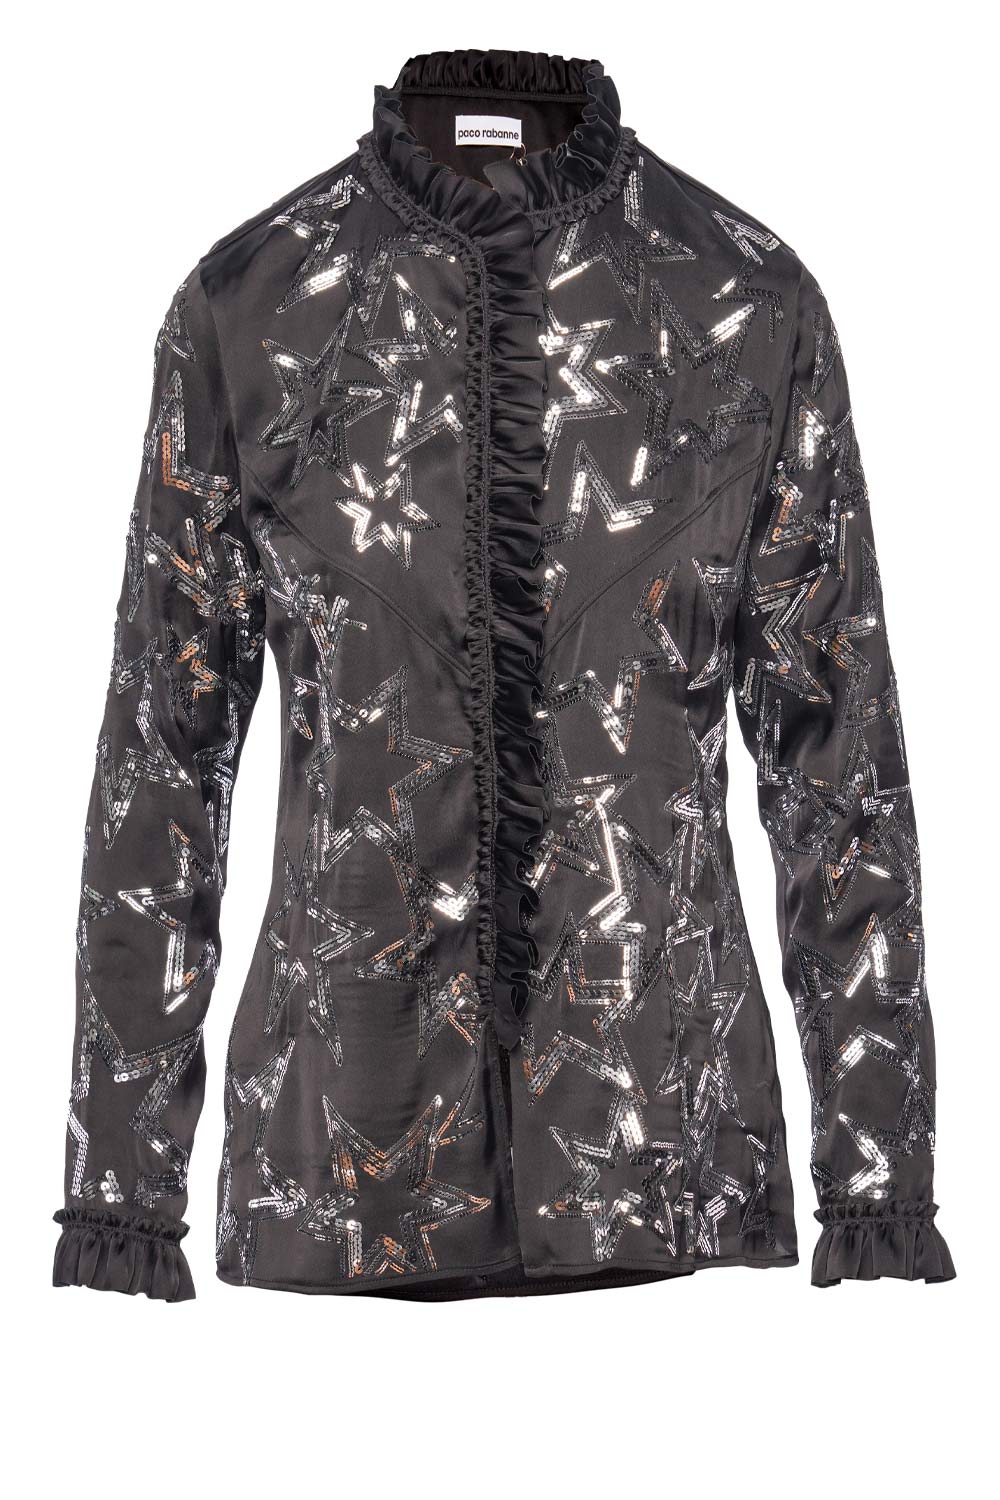 Paco Rabanne Star Sequin Embellished Button Down Top